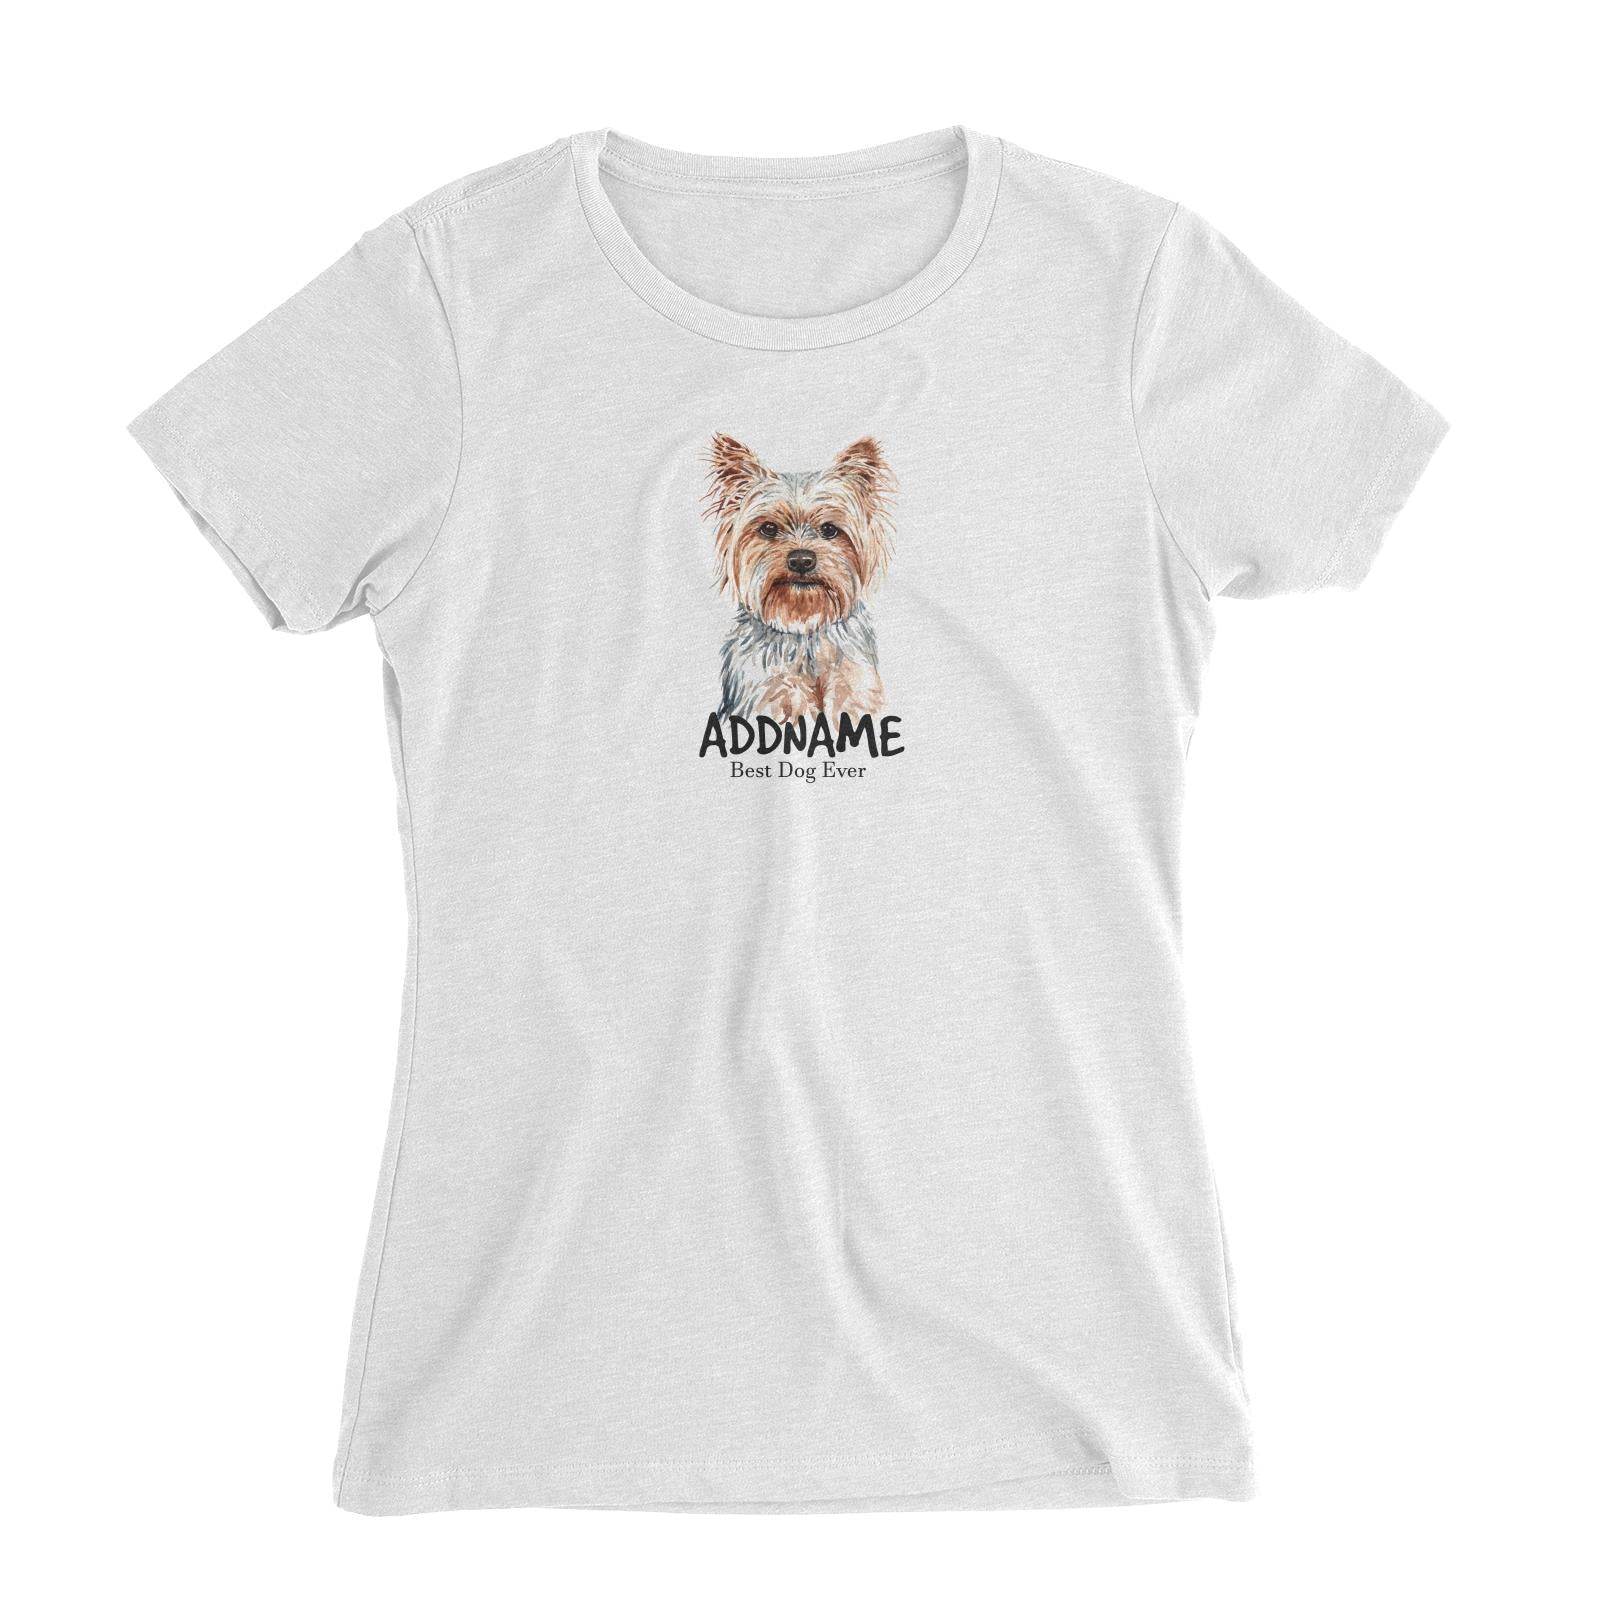 Watercolor Dog Yorkshire Terrier Best Dog Ever Addname Women's Slim Fit T-Shirt